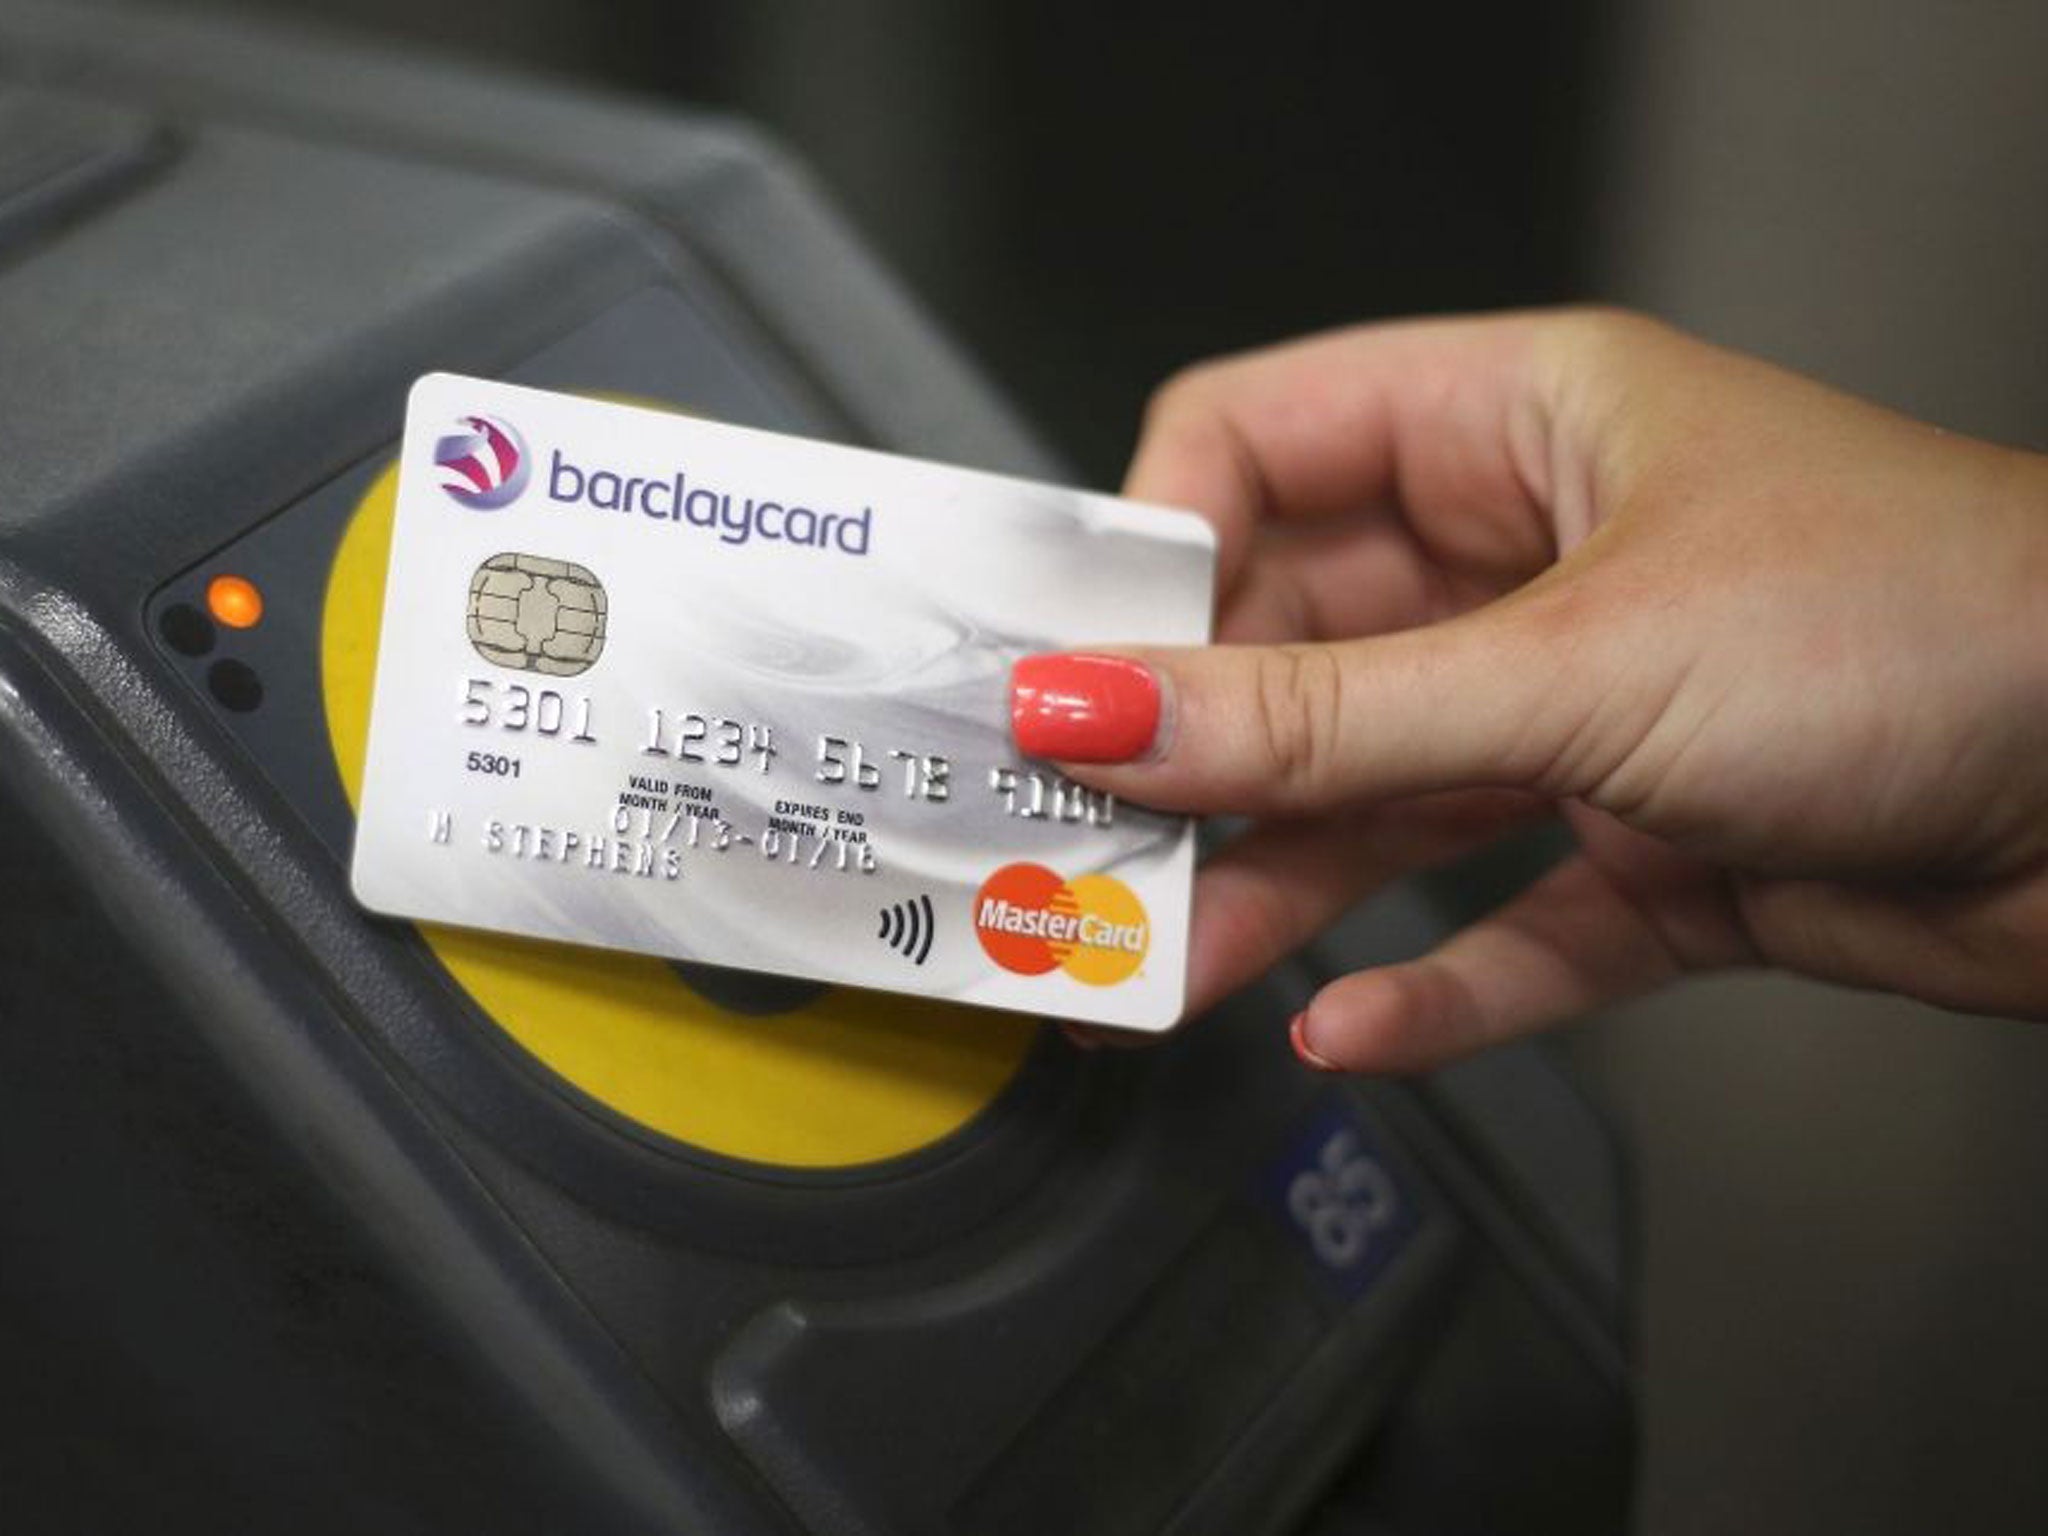 People making contactless payments will soon be able to spend up to £30 at a time with a swipe of their card